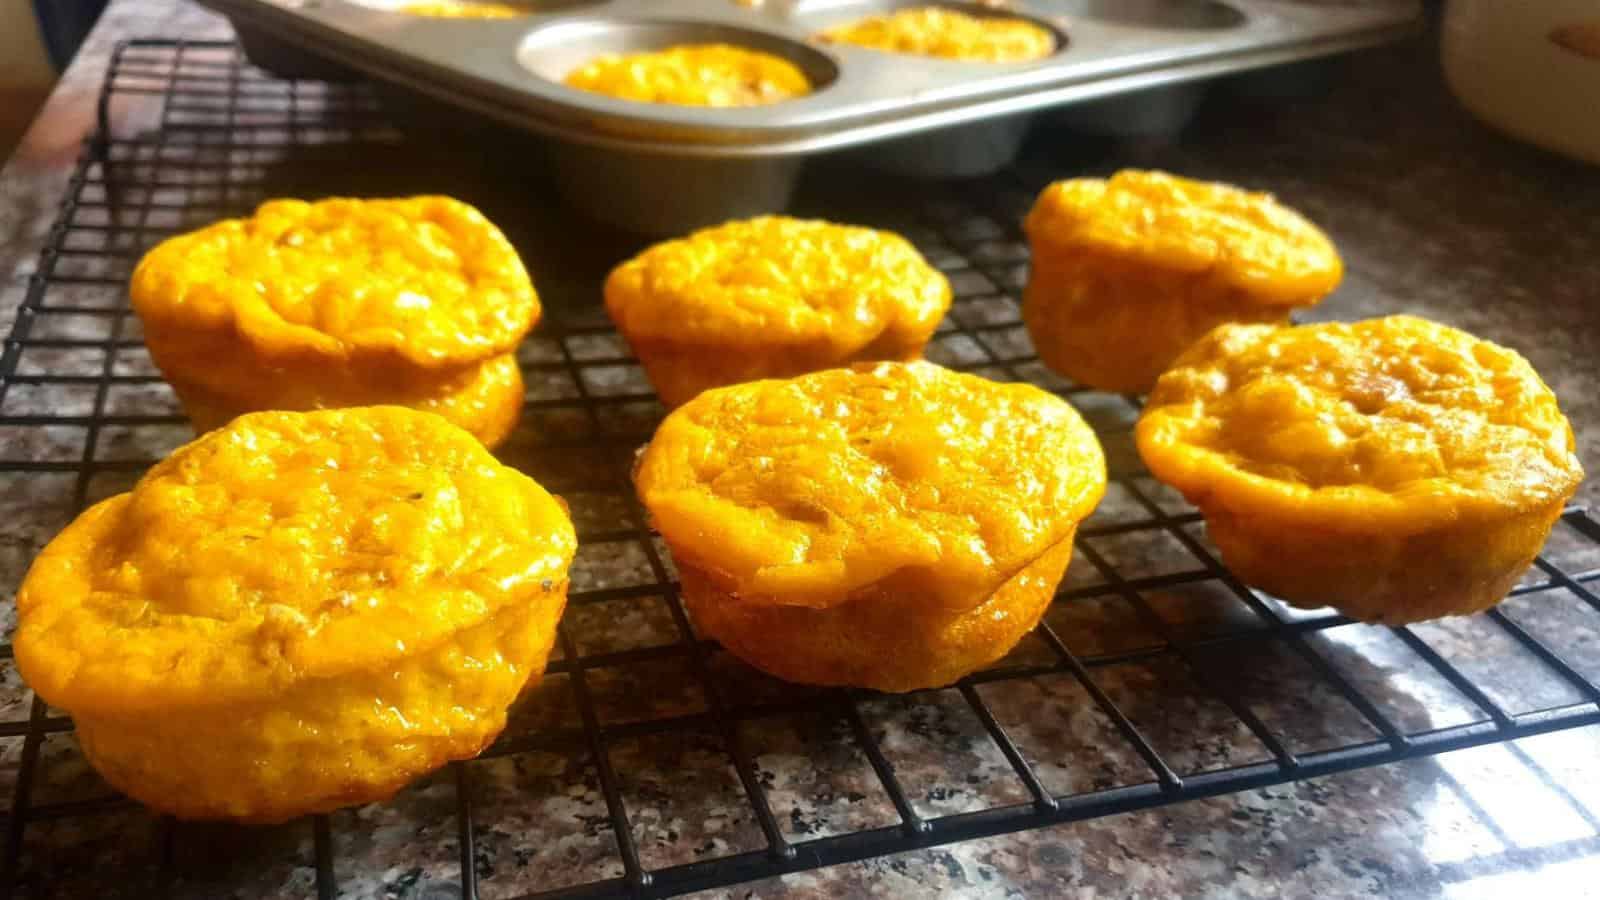 <p>Portable and protein-rich, these low-carb egg muffins are your ticket to a morning win. Pack them with your choice of veggies or meat. They’re like mini breakfast heroes, fighting off hunger till lunch.<br><strong>Get the Recipe: </strong><a href="https://www.primaledgehealth.com/carnivore-breakfast-muffins/?utm_source=msn&utm_medium=page&utm_campaign=msn">Easy Egg Muffins</a></p>